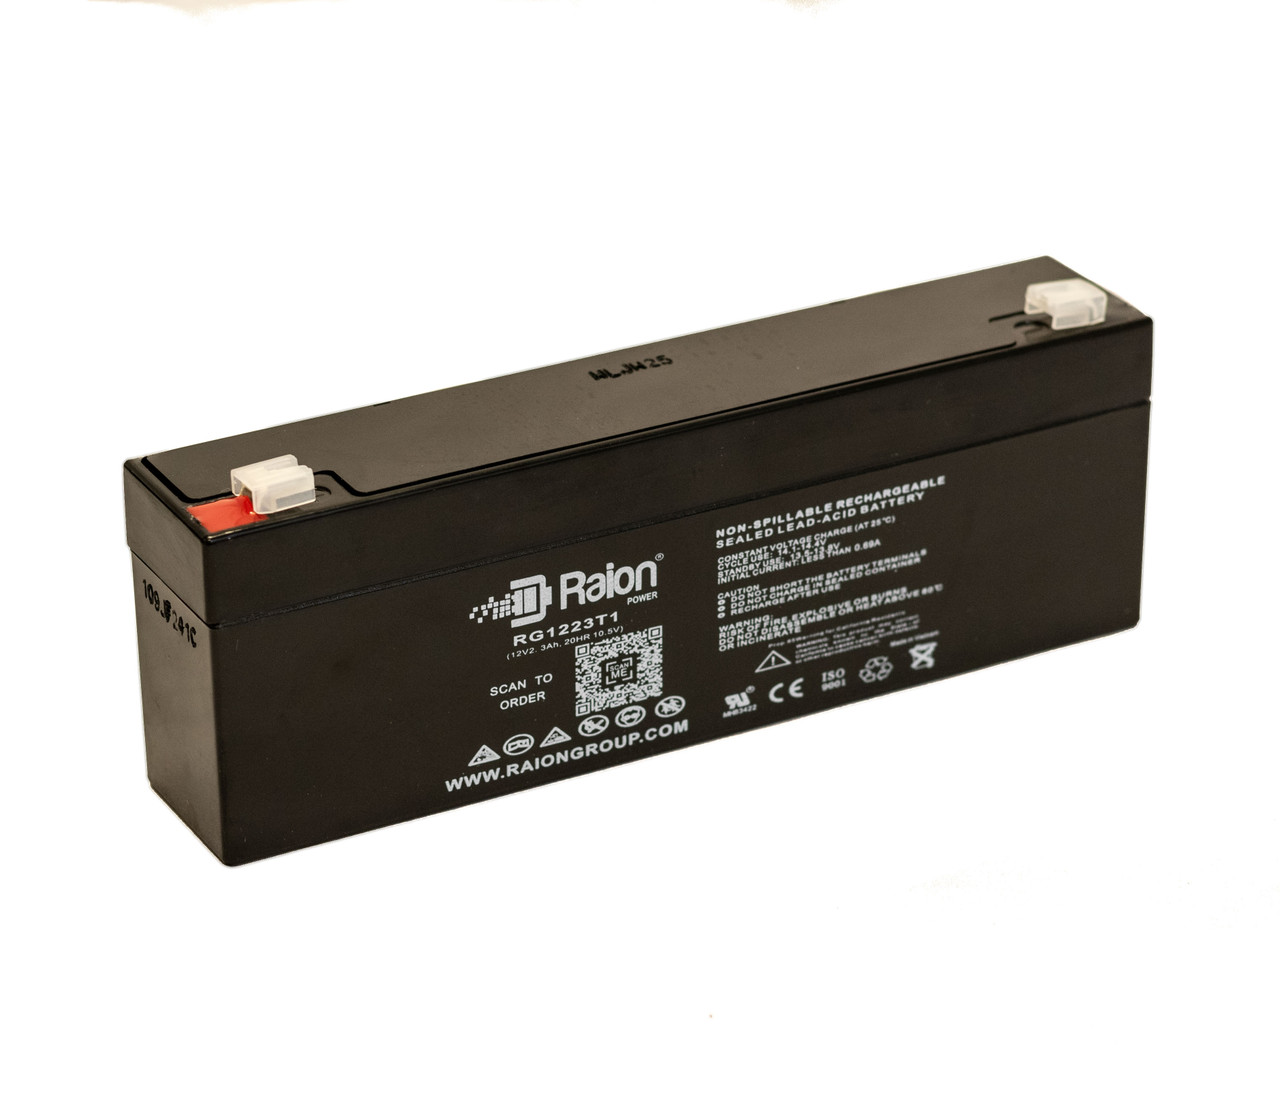 Raion Power RG1223T1 Replacement Battery for Exell EB1222